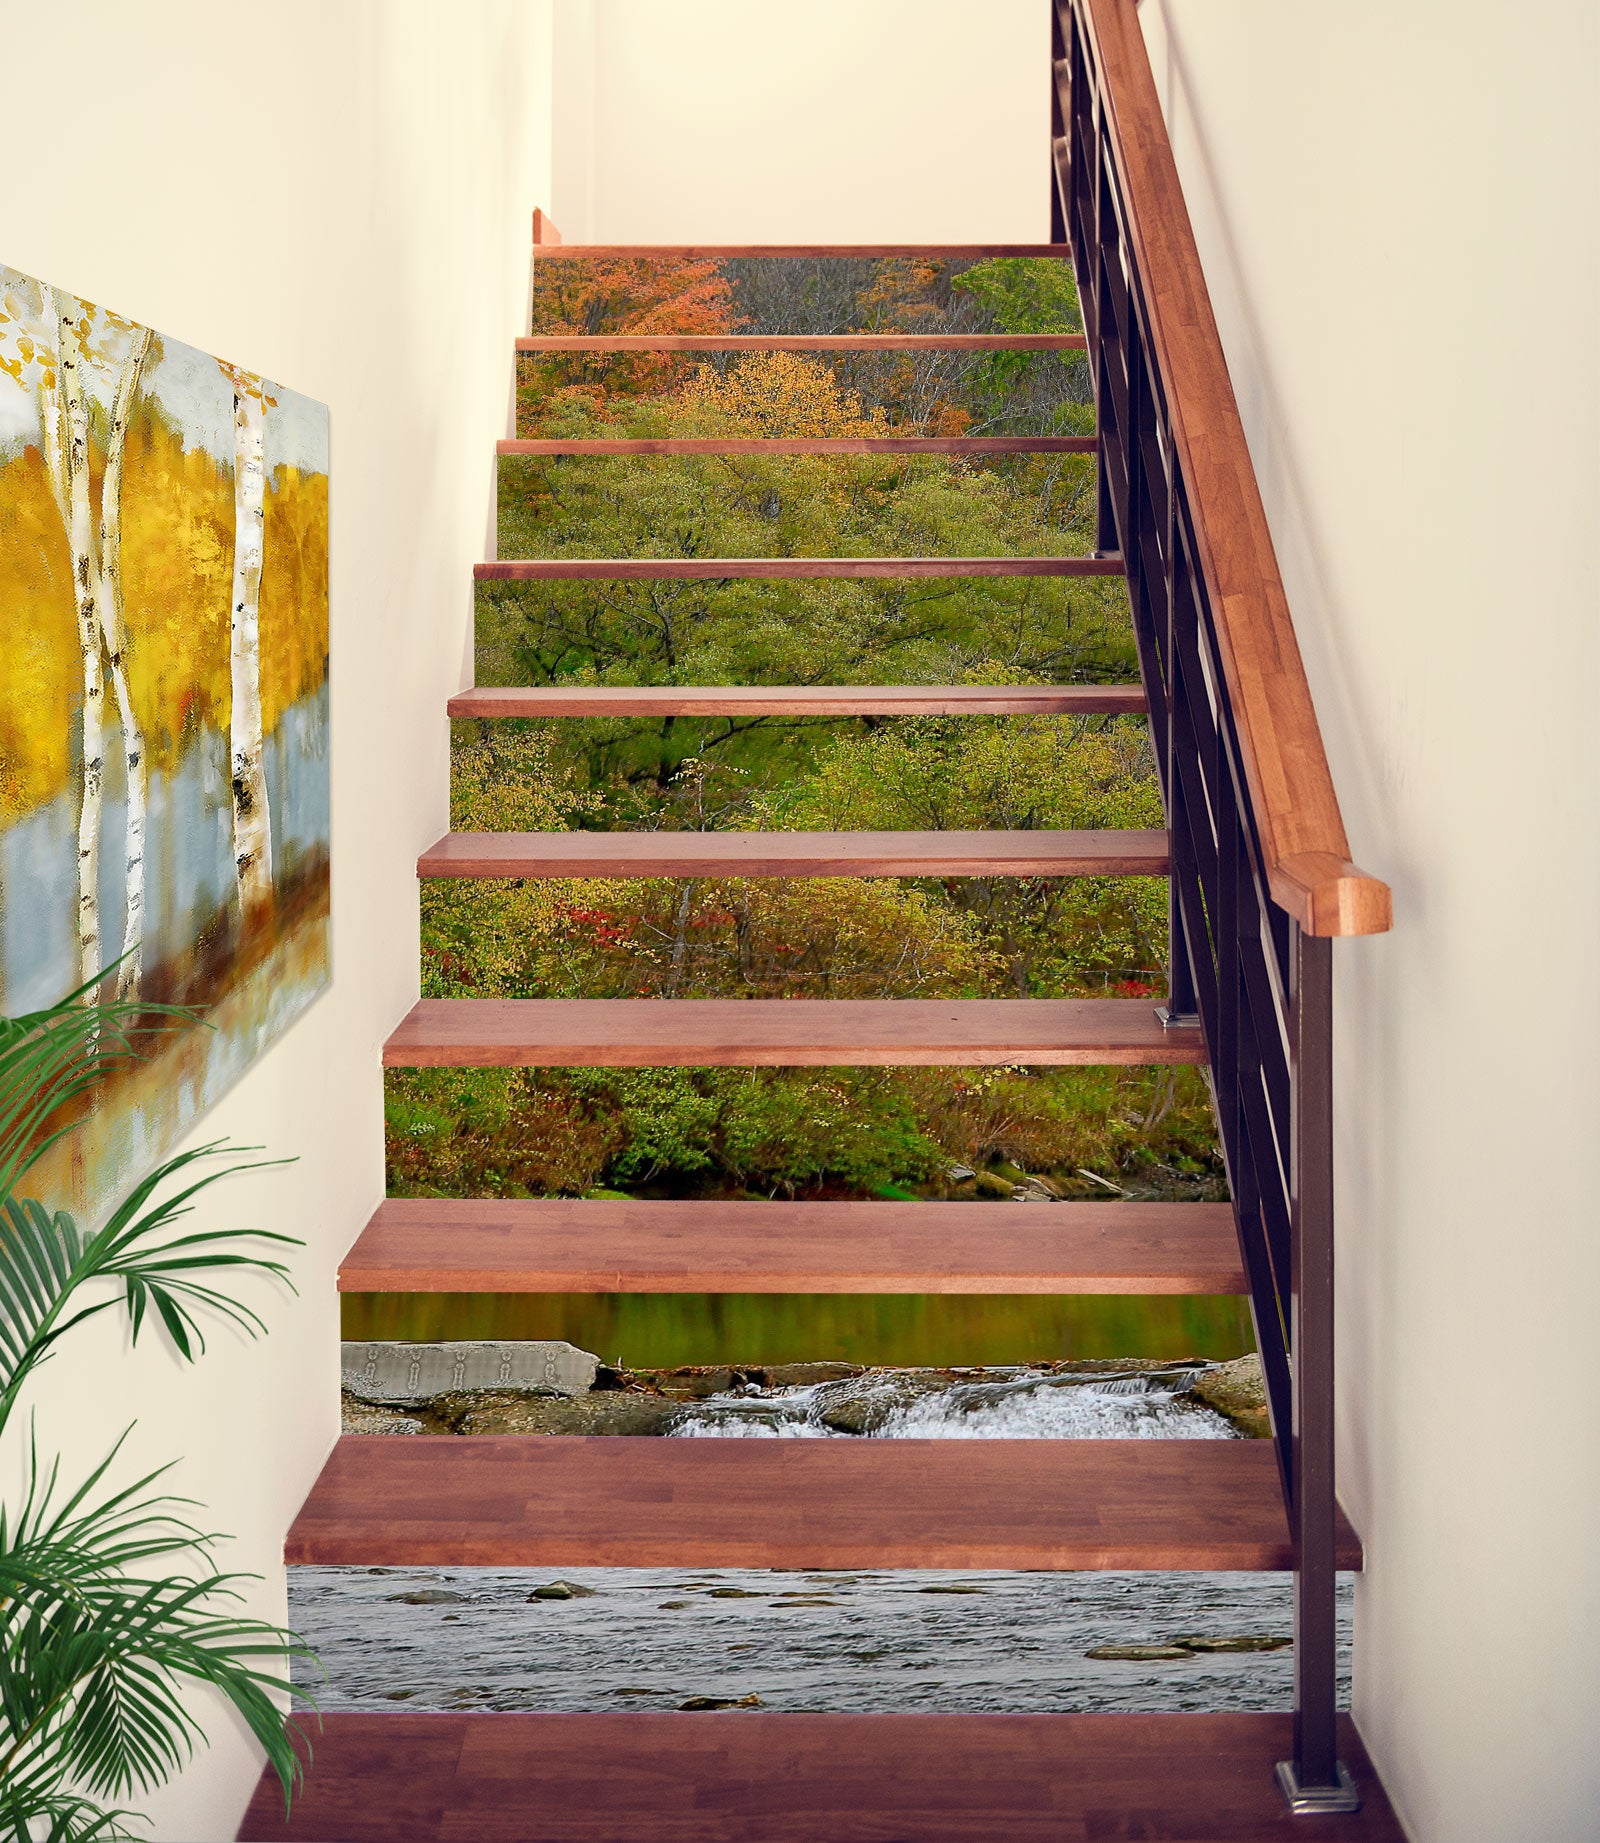 3D River Woods 101119 Kathy Barefield Stair Risers